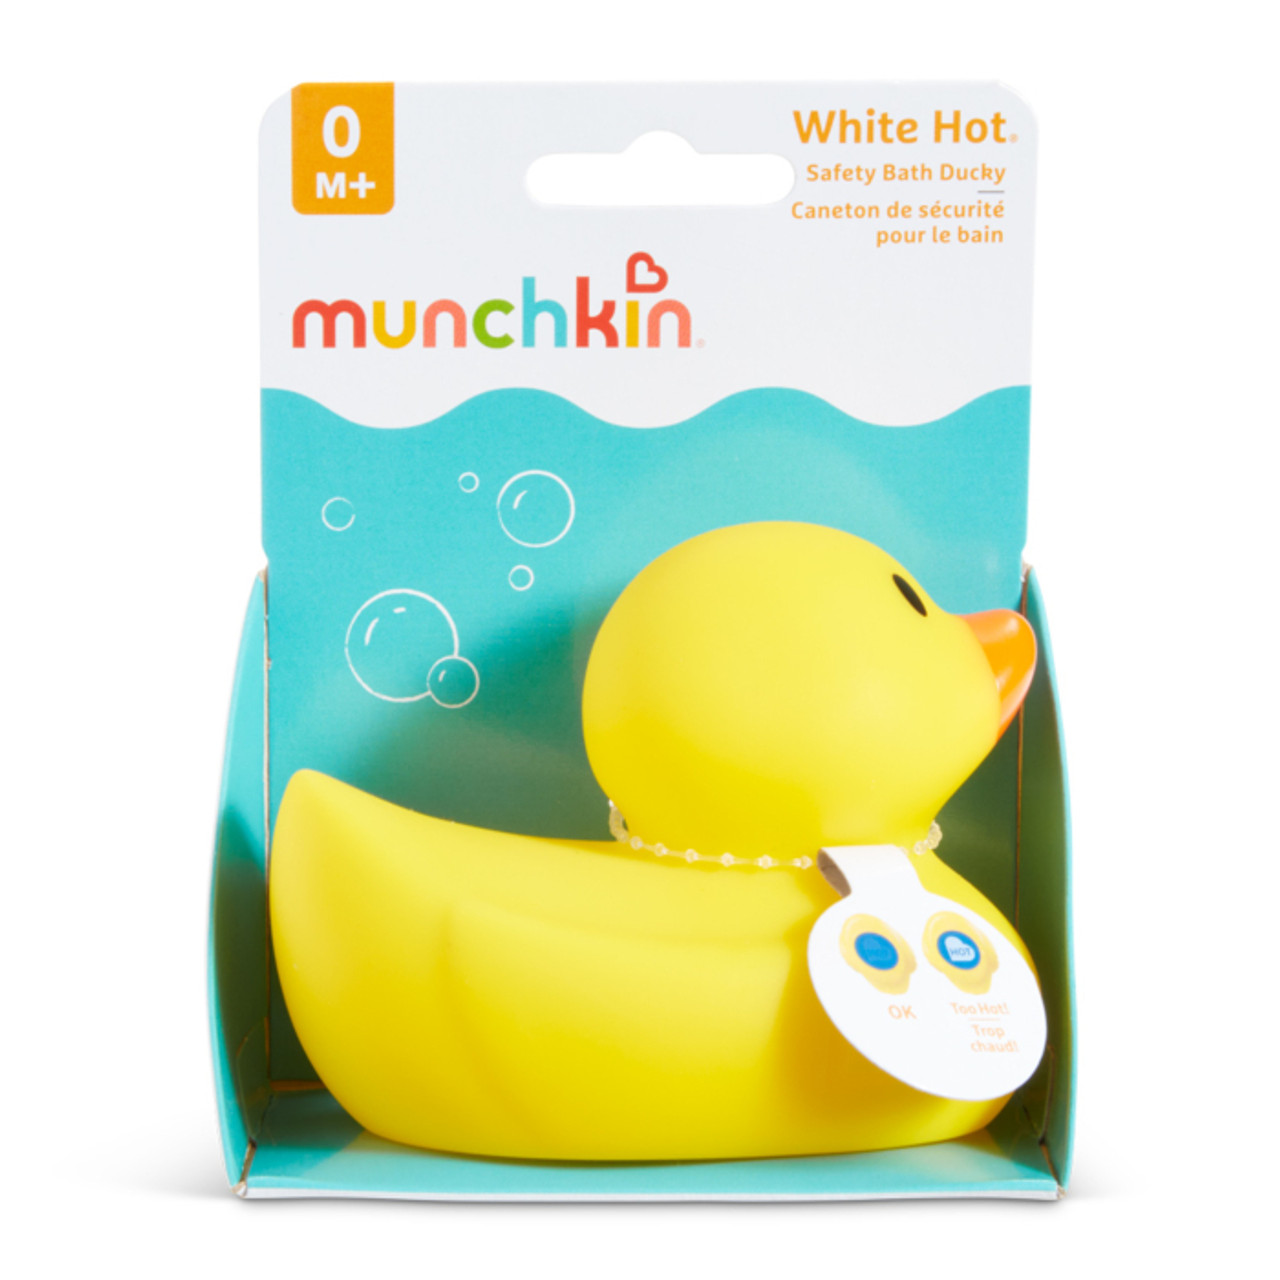 Munchkin White Hot Infant Safety Spoons 4 Count